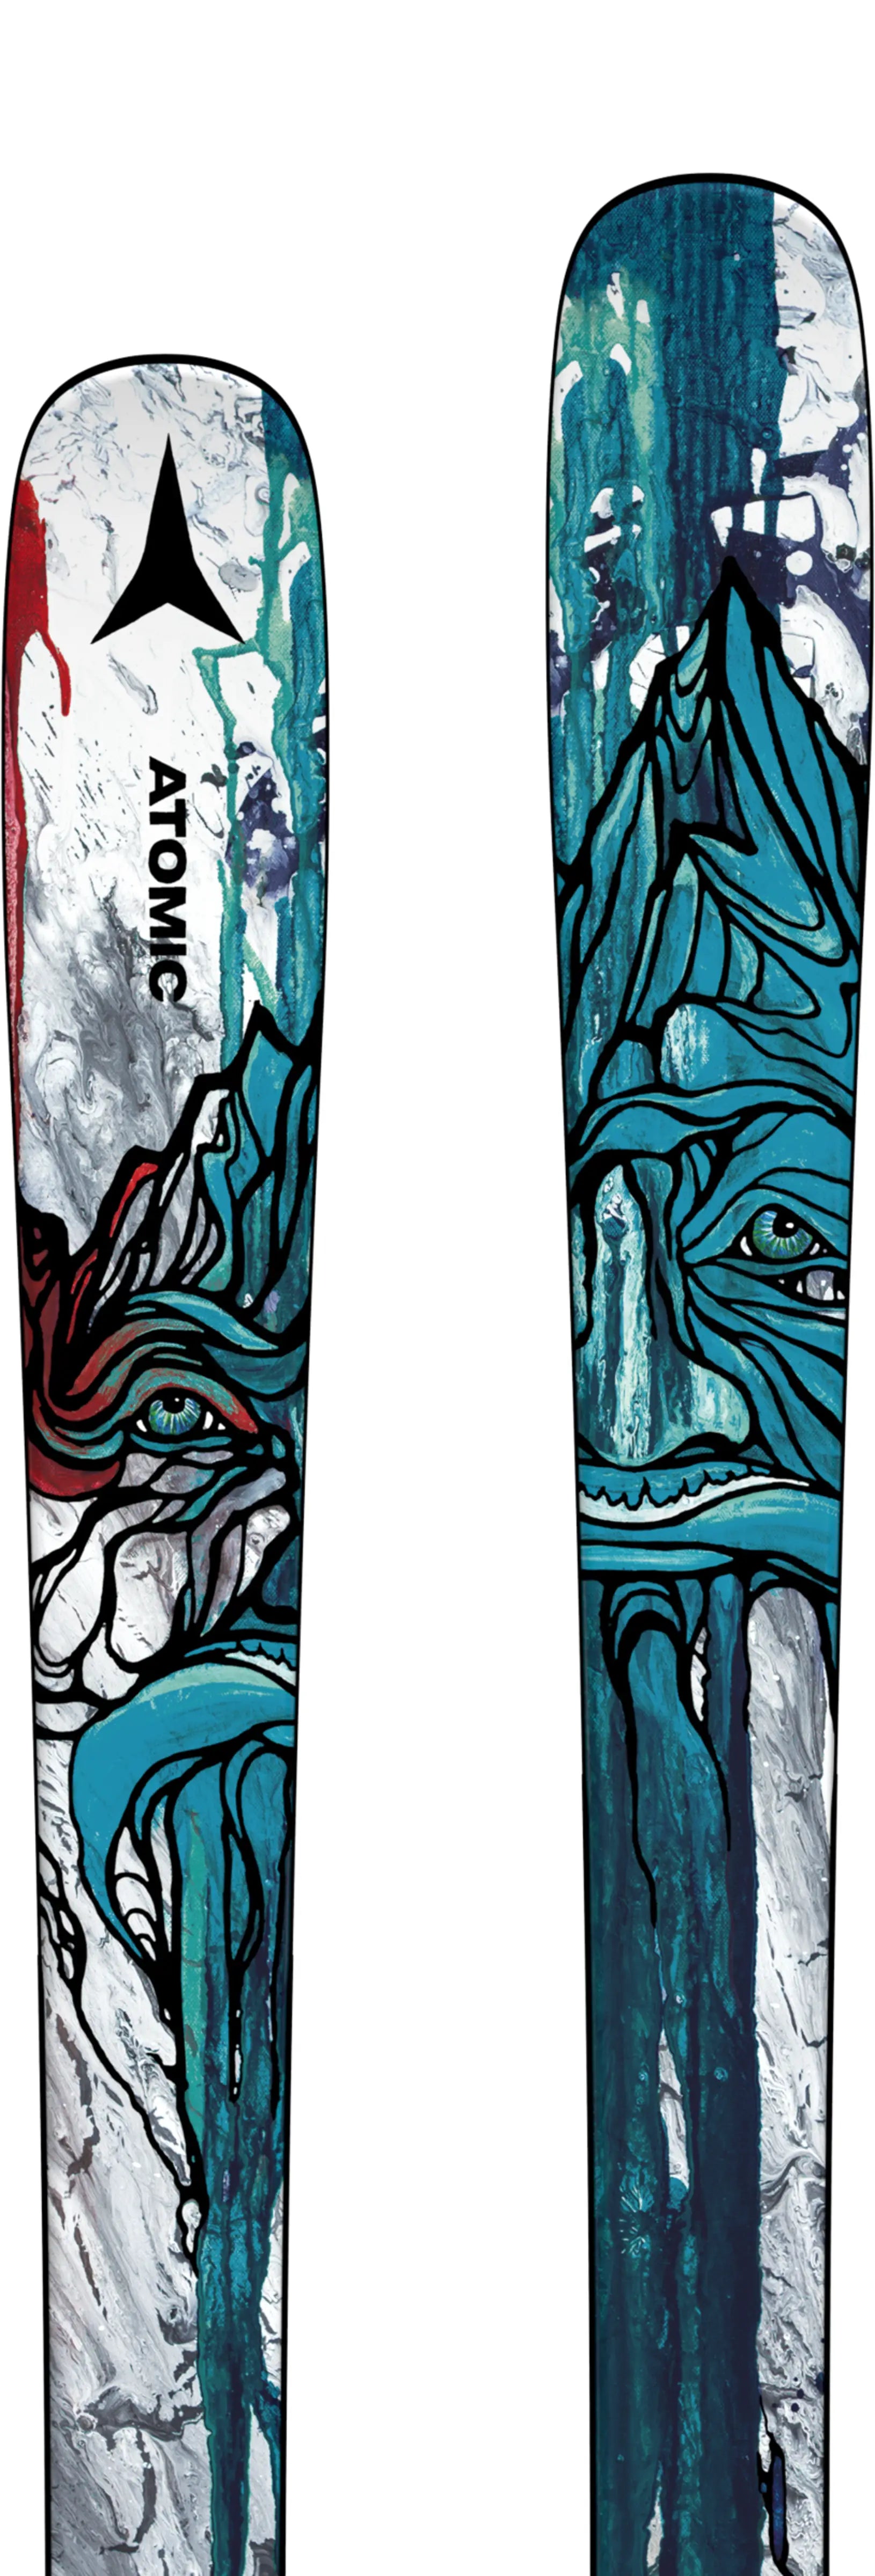 The Atomic Bent 85 is a versatile all-mountain, park-slaying ski designed by Chris Benchetler and the Atomic Freeski team to perform anywhere you want to take it.